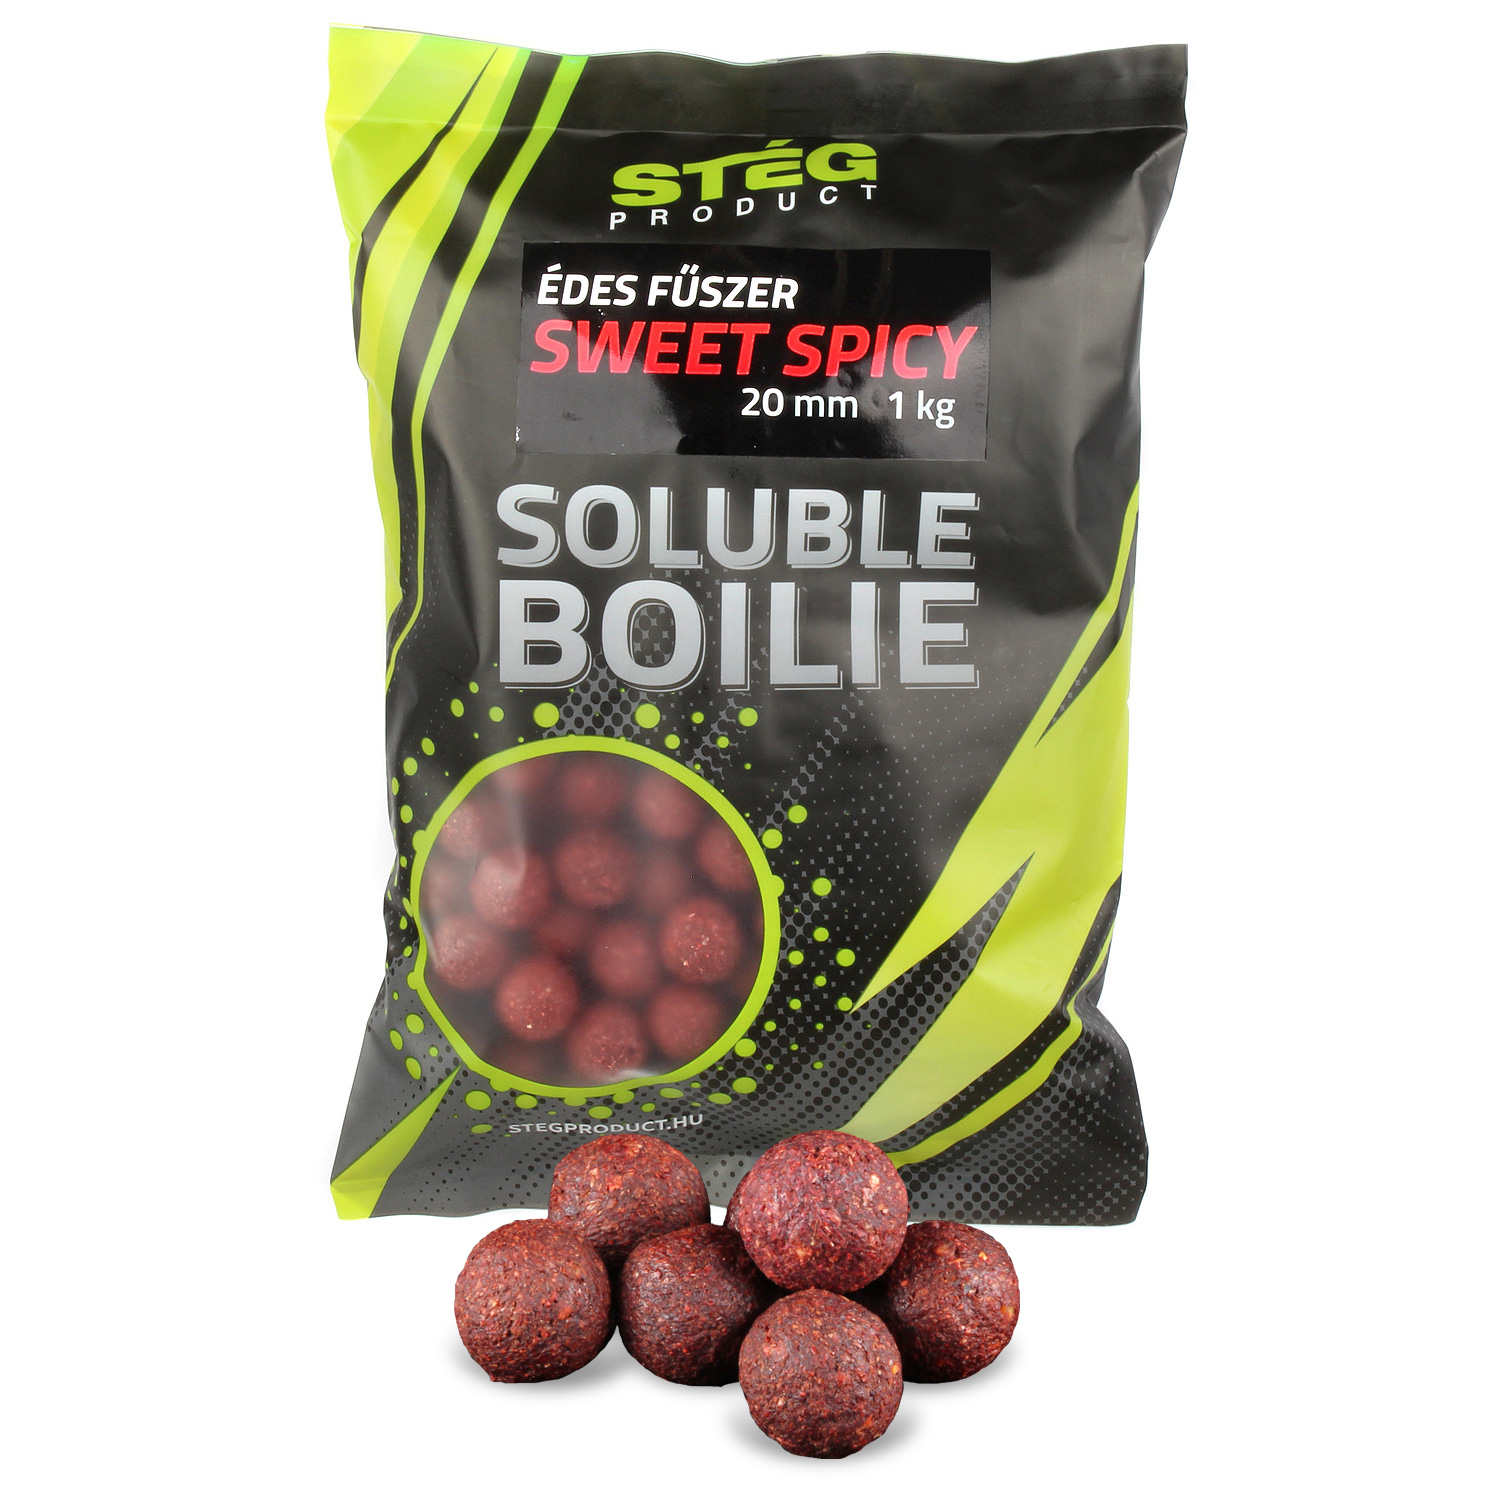 Stg Product Soluble Boilie 20mm Sweet Spicy 1kg